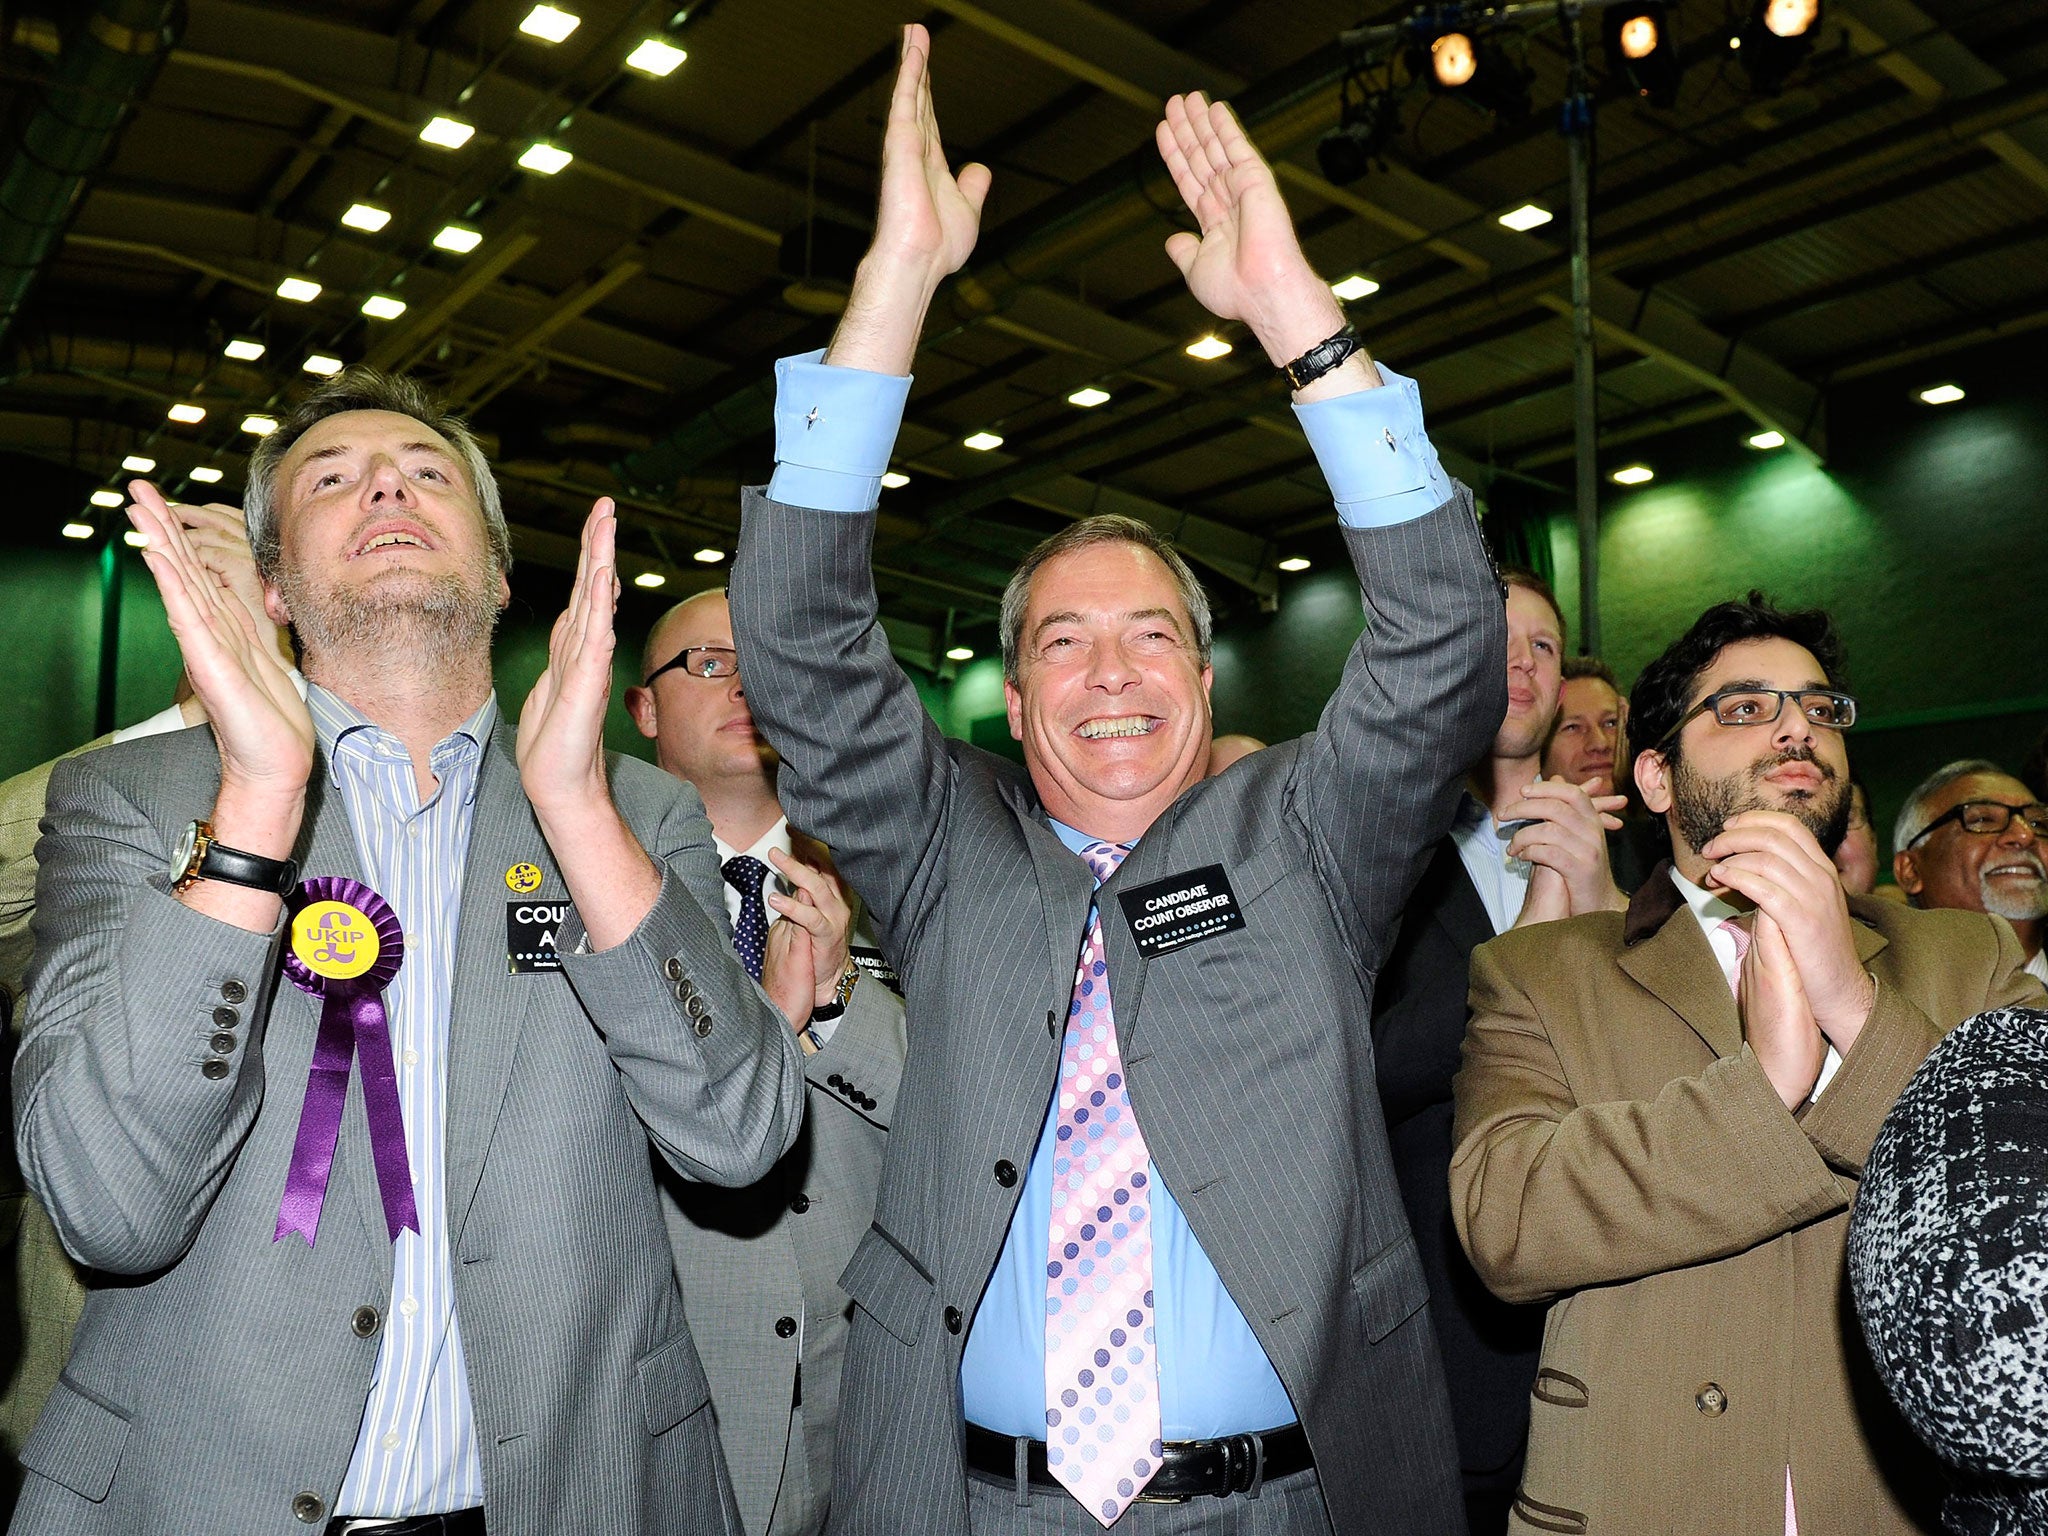 Nigel Farage and members of the UKIP team celebrate after Mark Reckless won the Rochester and Strood by-election at Medway Park, Gillingham near Rochester, Kent